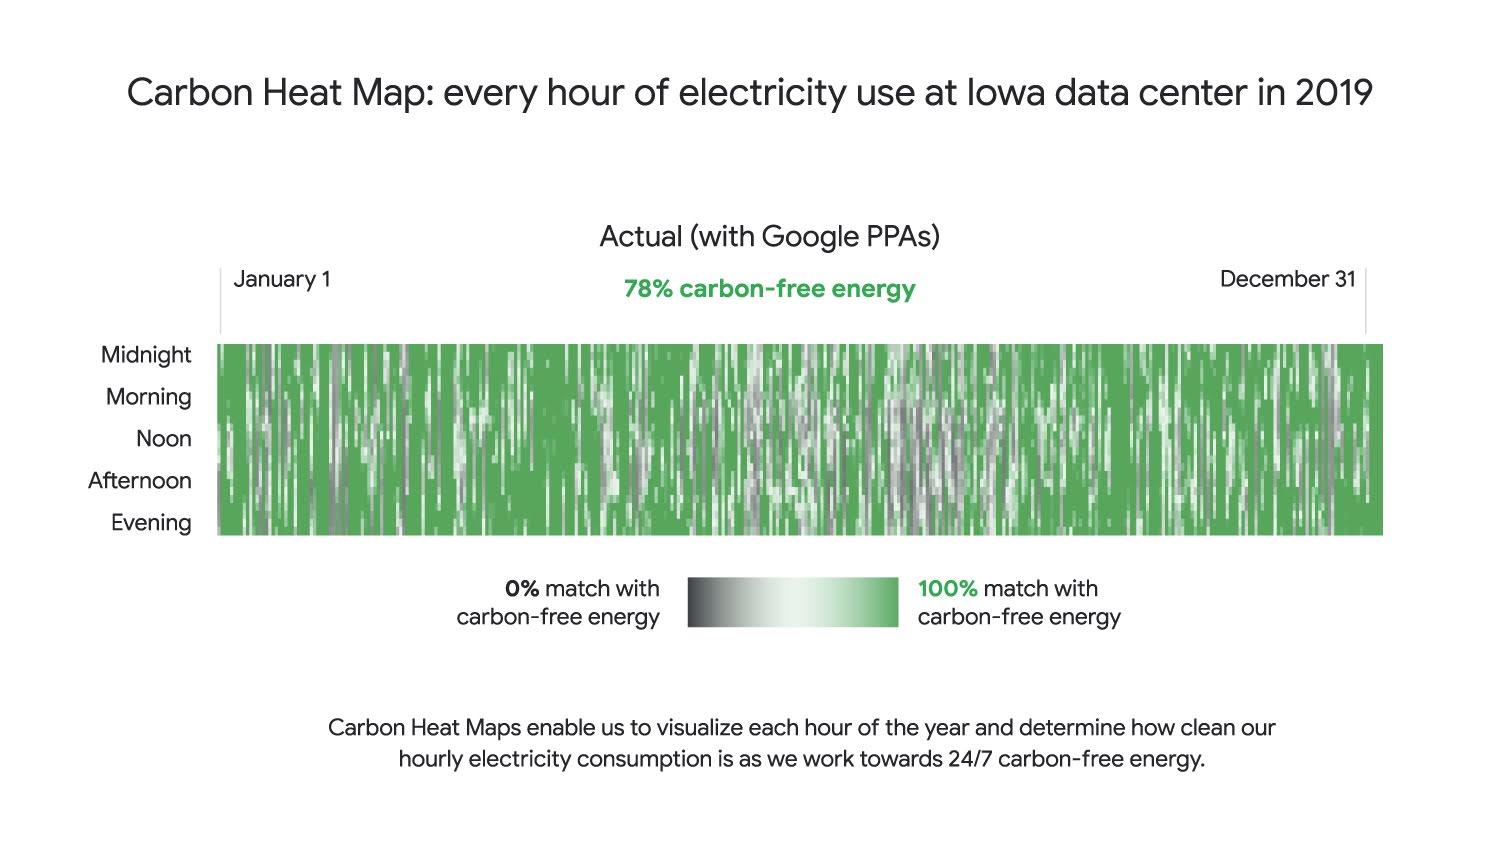 Visual showing every hour of electricity use at Iowa data center in 2019